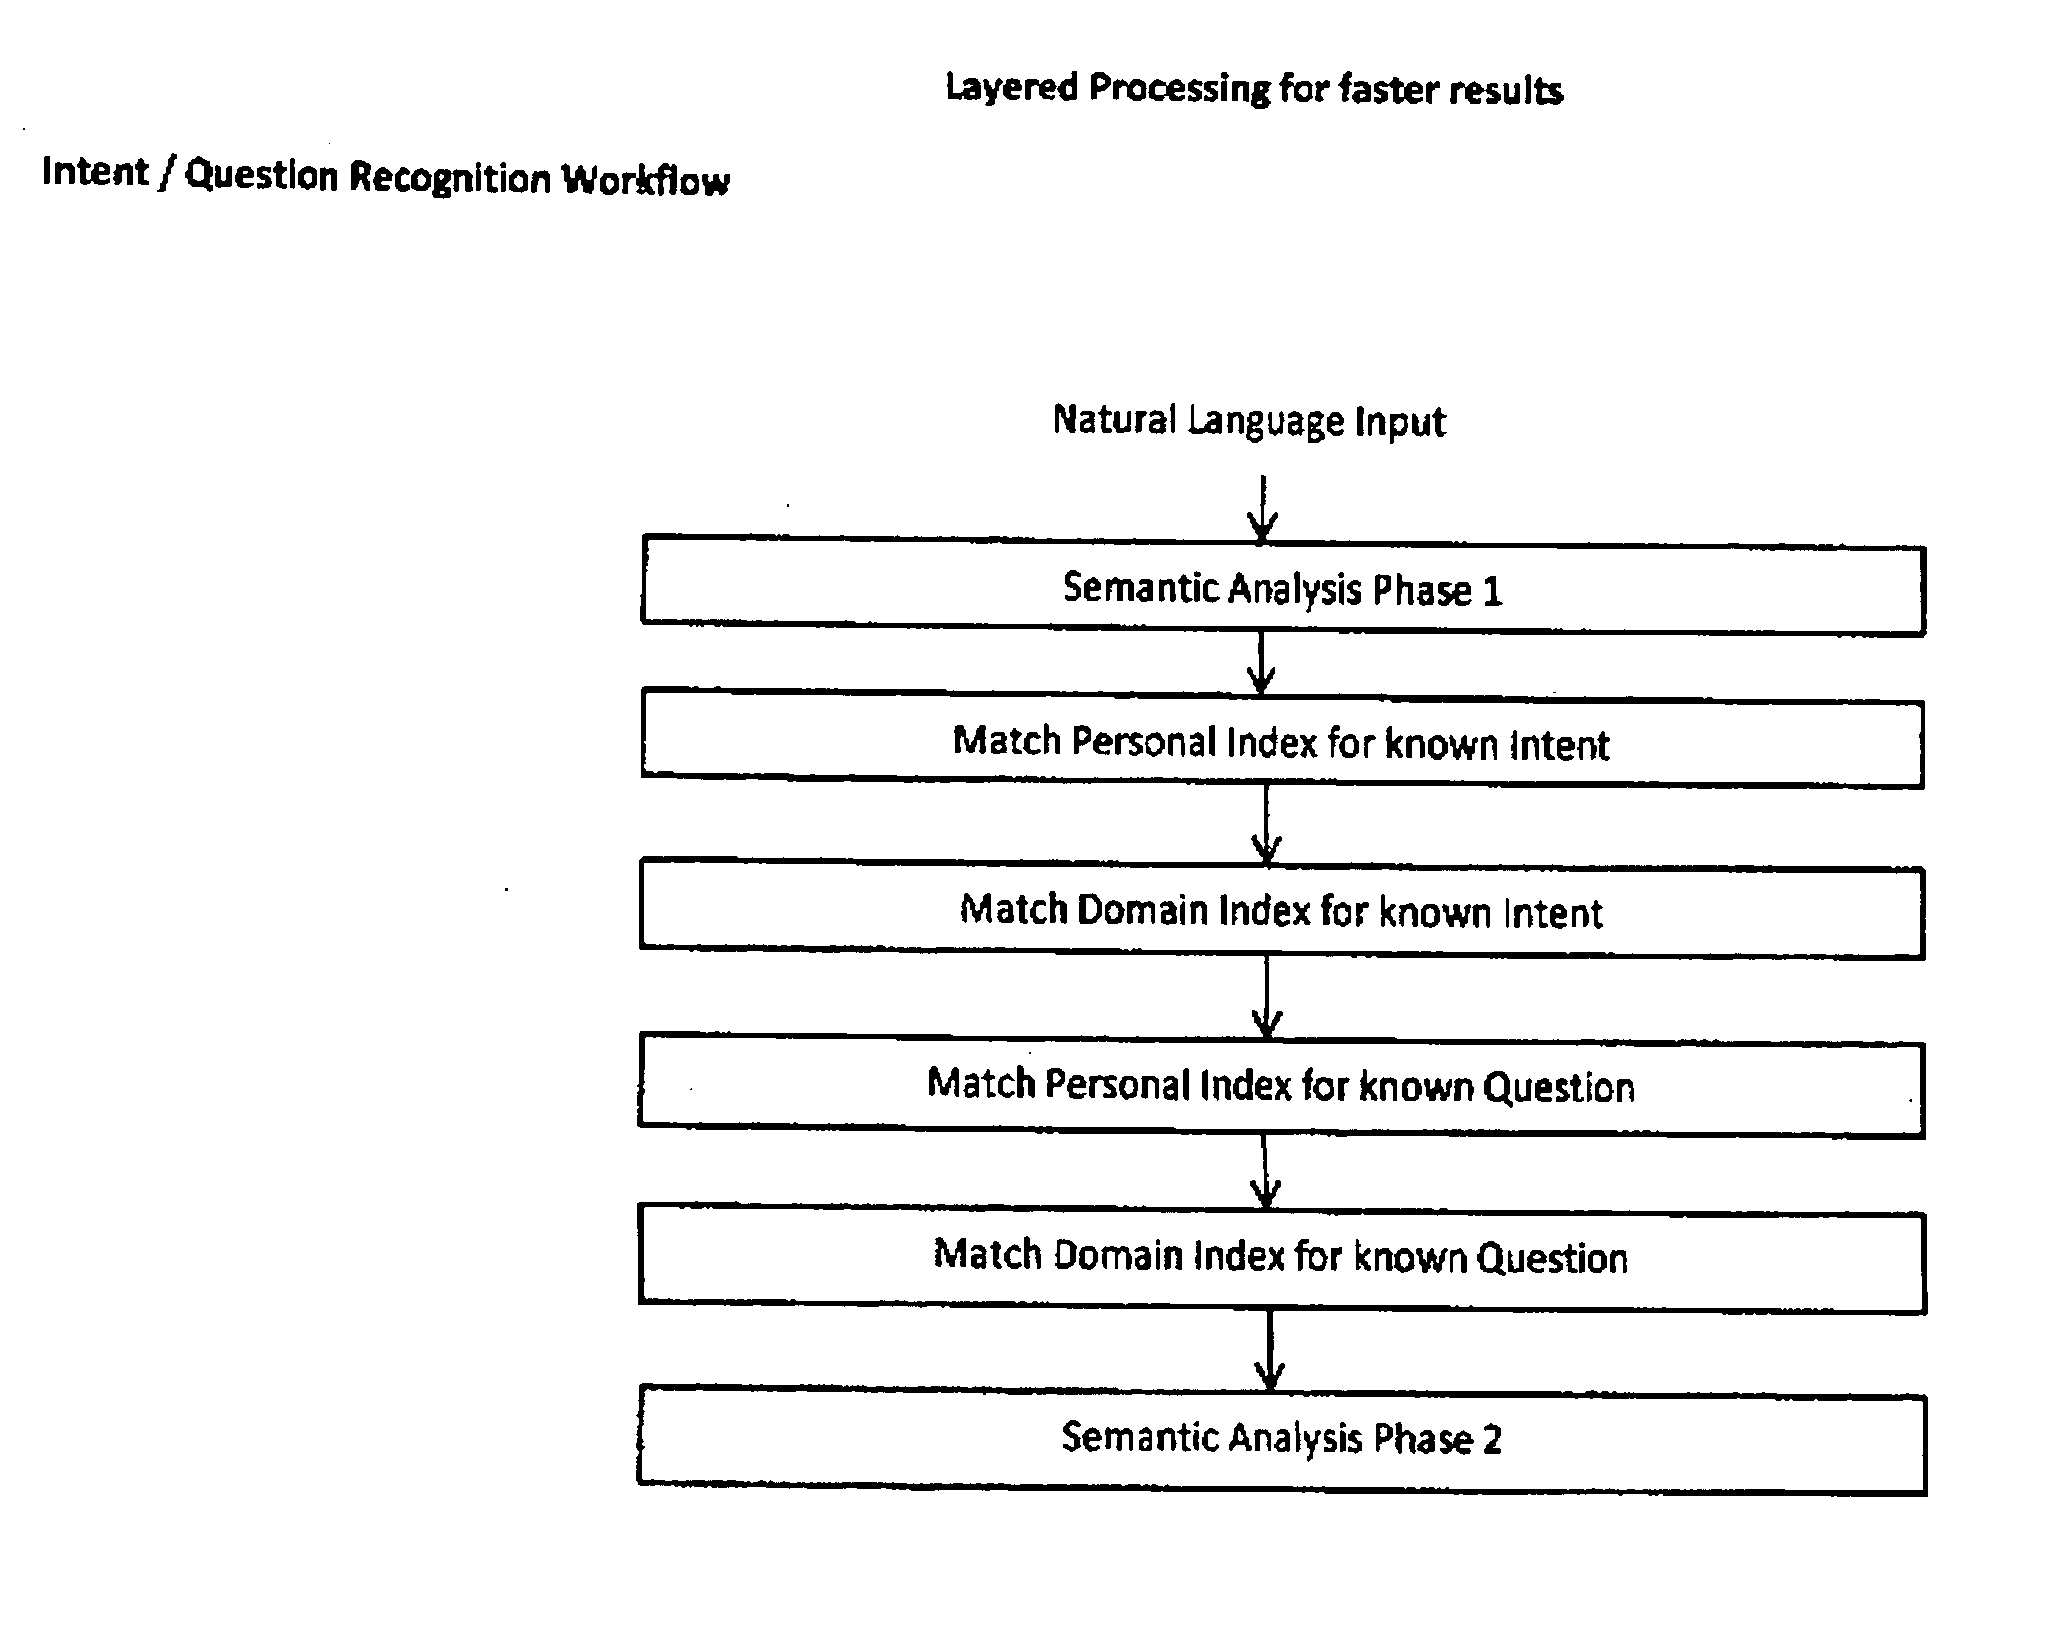 Method and system for quickly recognizing and responding to user intents and questions from natural language input using intelligent hierarchical processing and personalized adaptive semantic interface